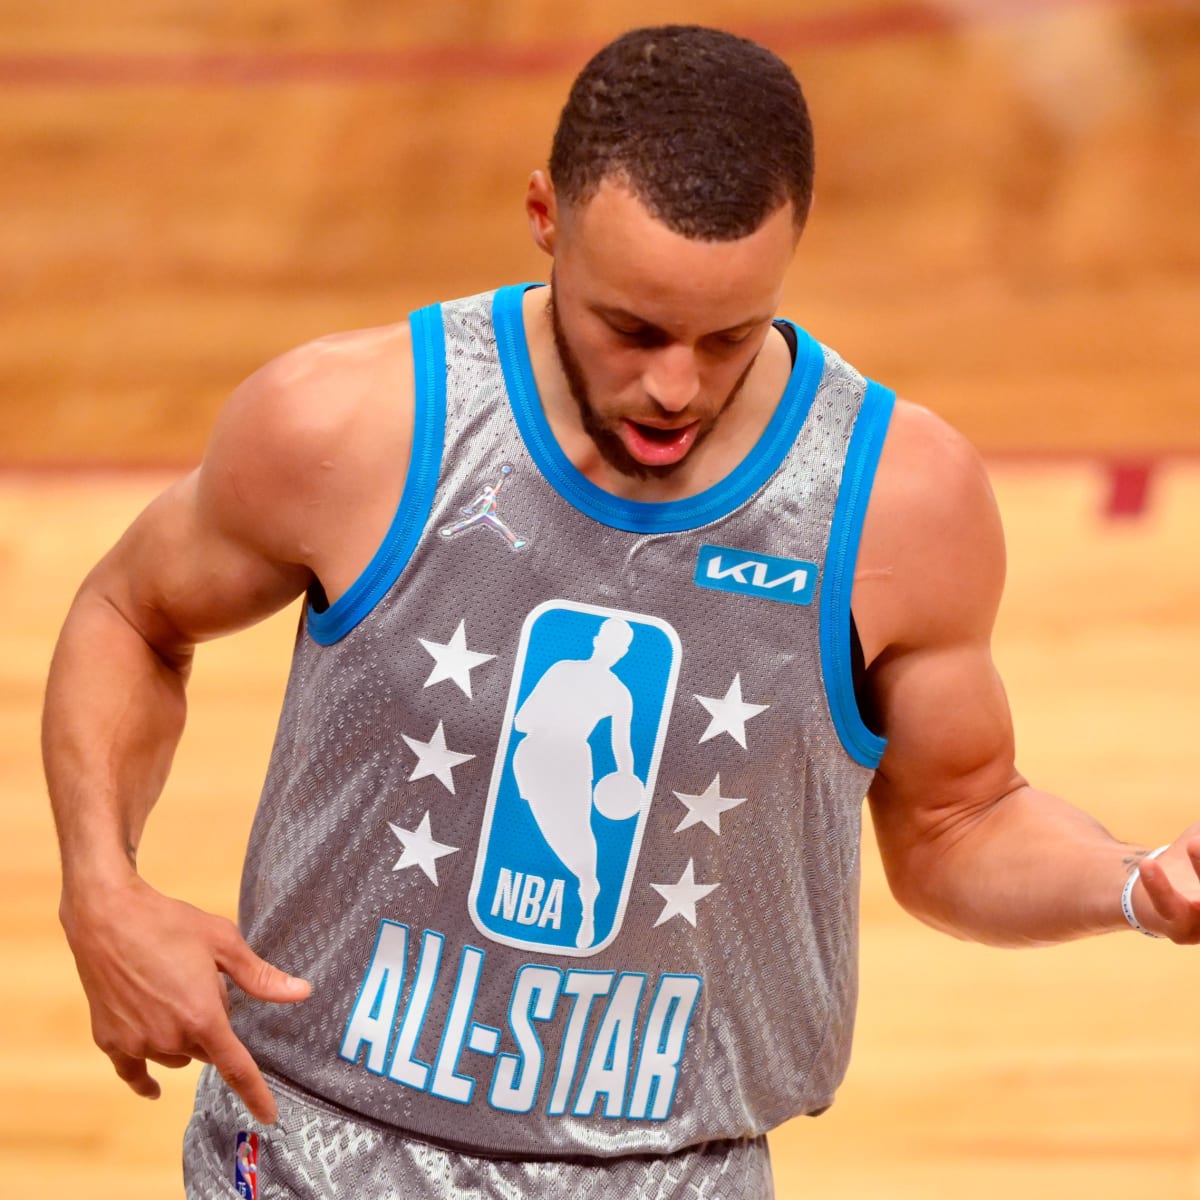 Stephen Curry sets NBA All-Star record for most 3-pointers, named game MVP